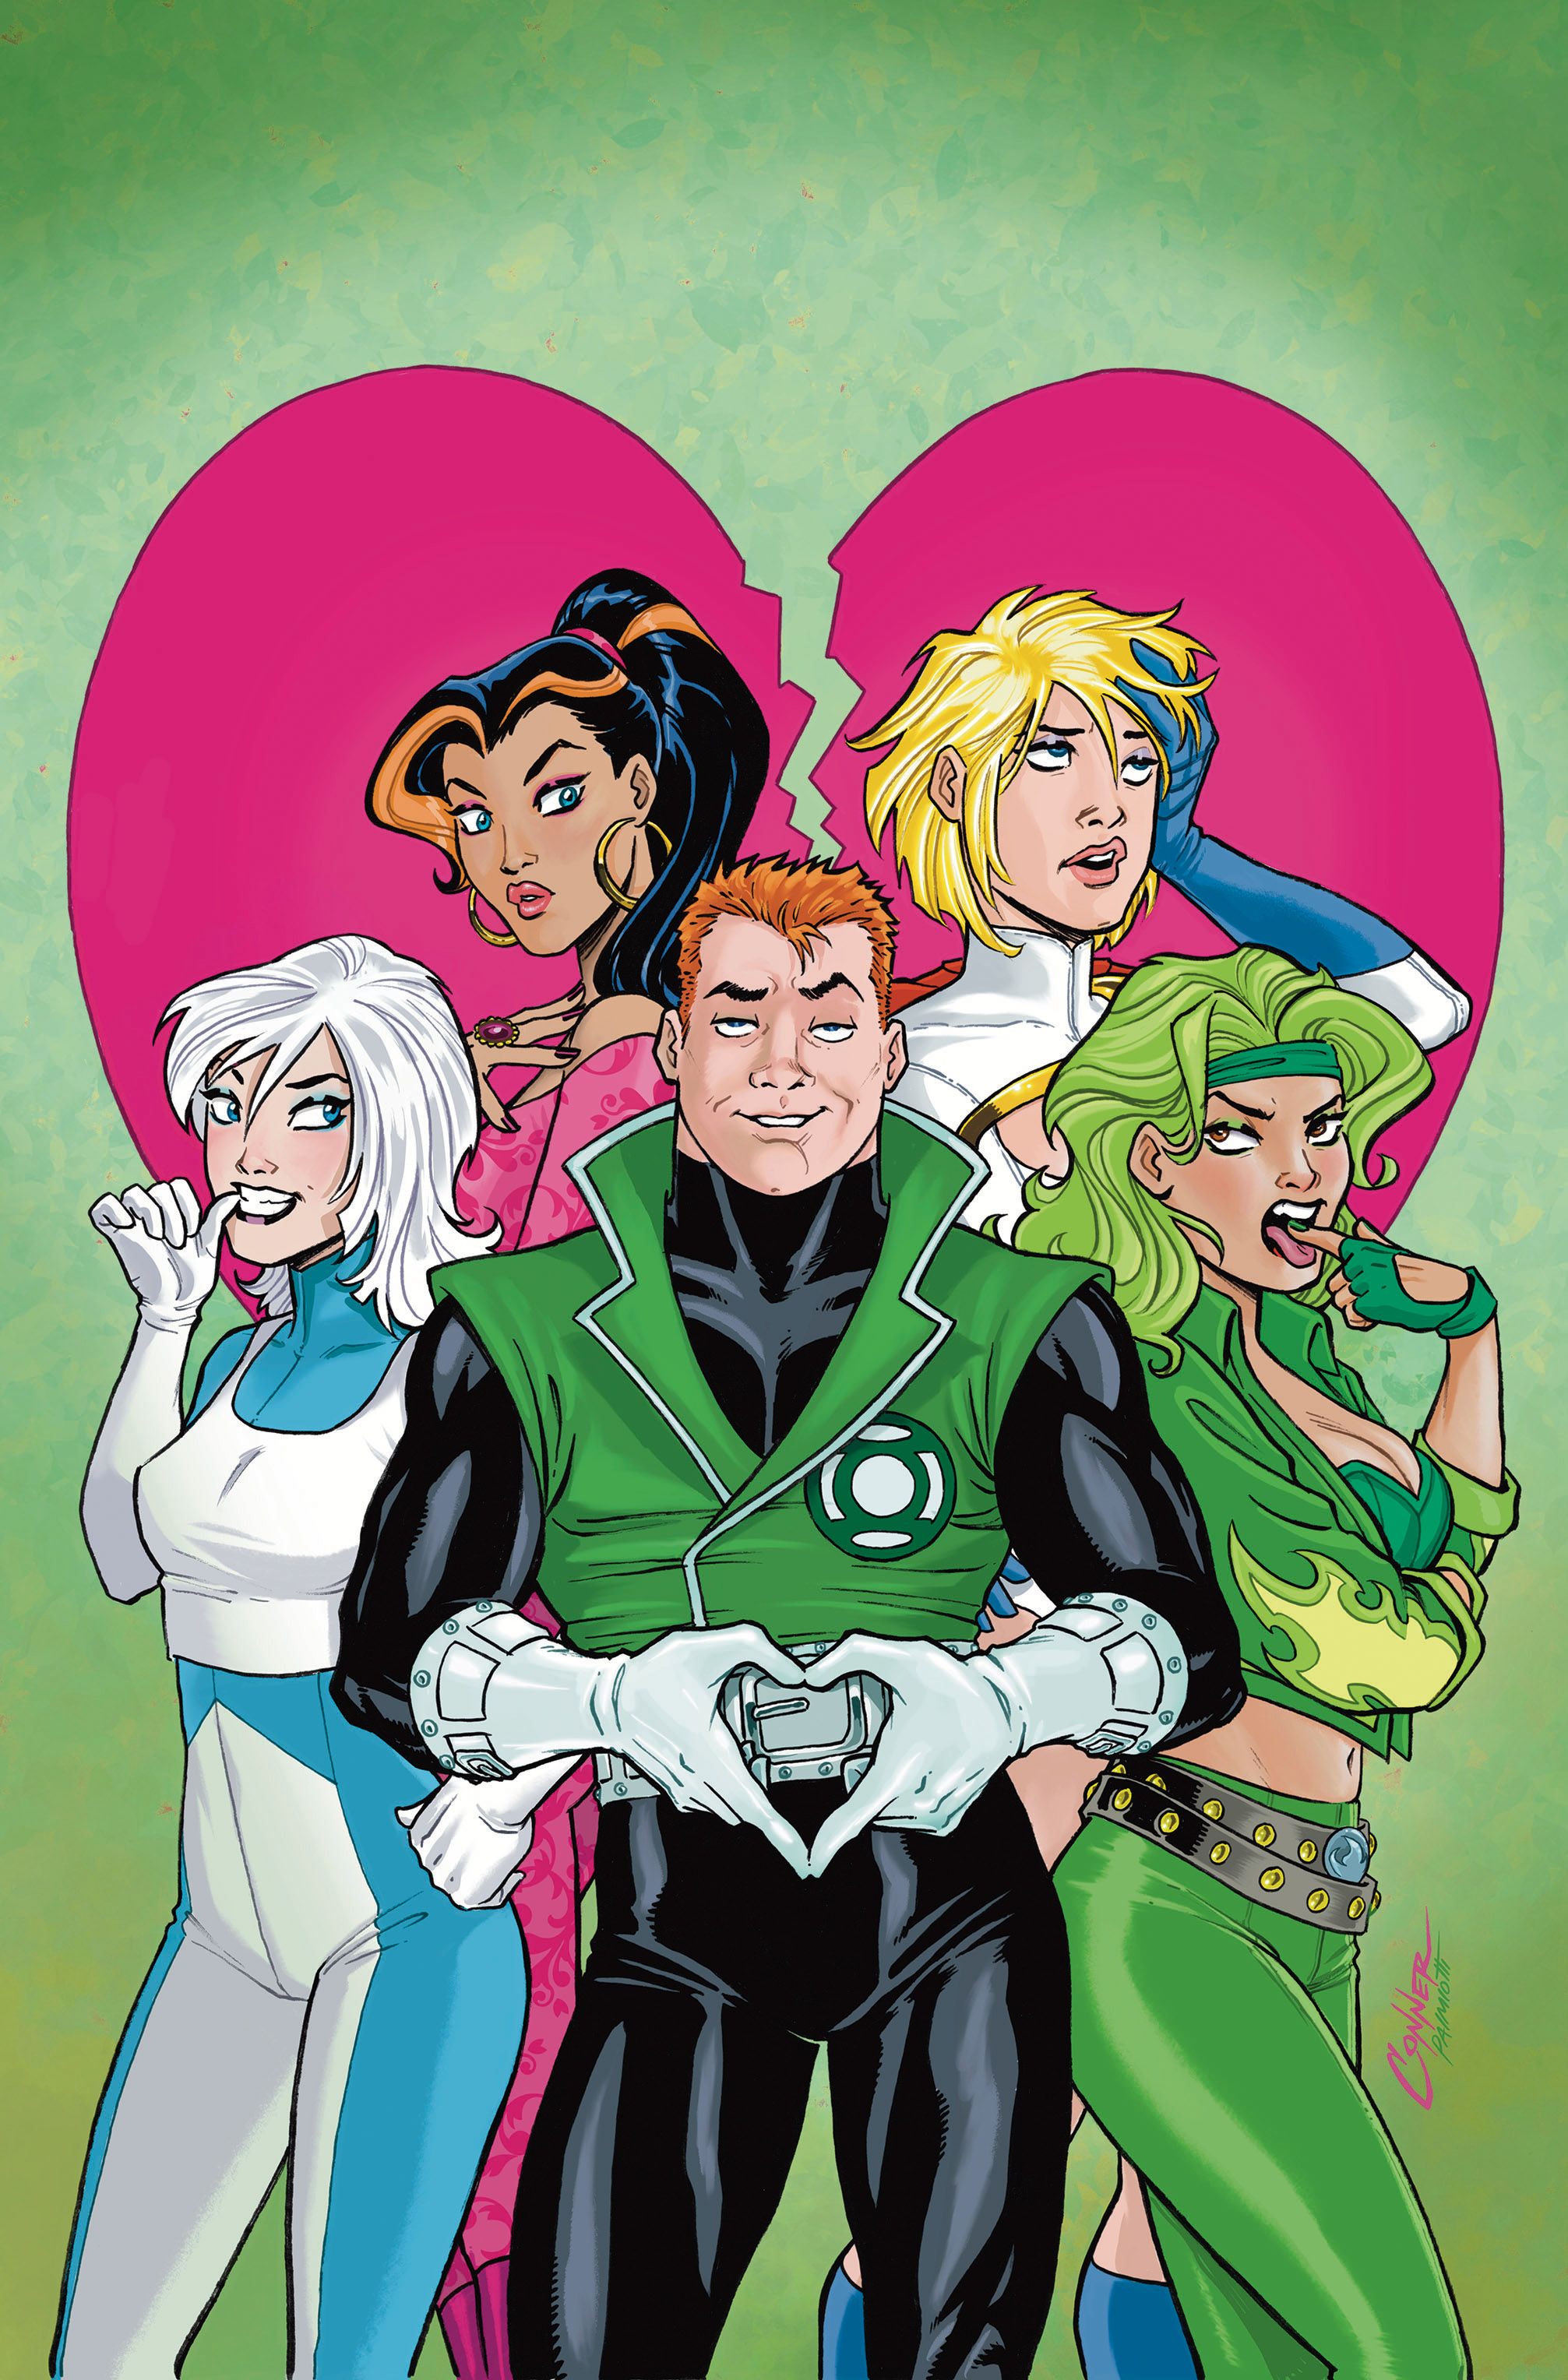 “How to Lose a Guy Gardner in 10 Days”: DC’s Iconic Heroes to Star in Rom-Com-Inspired Valentine’s Day Special